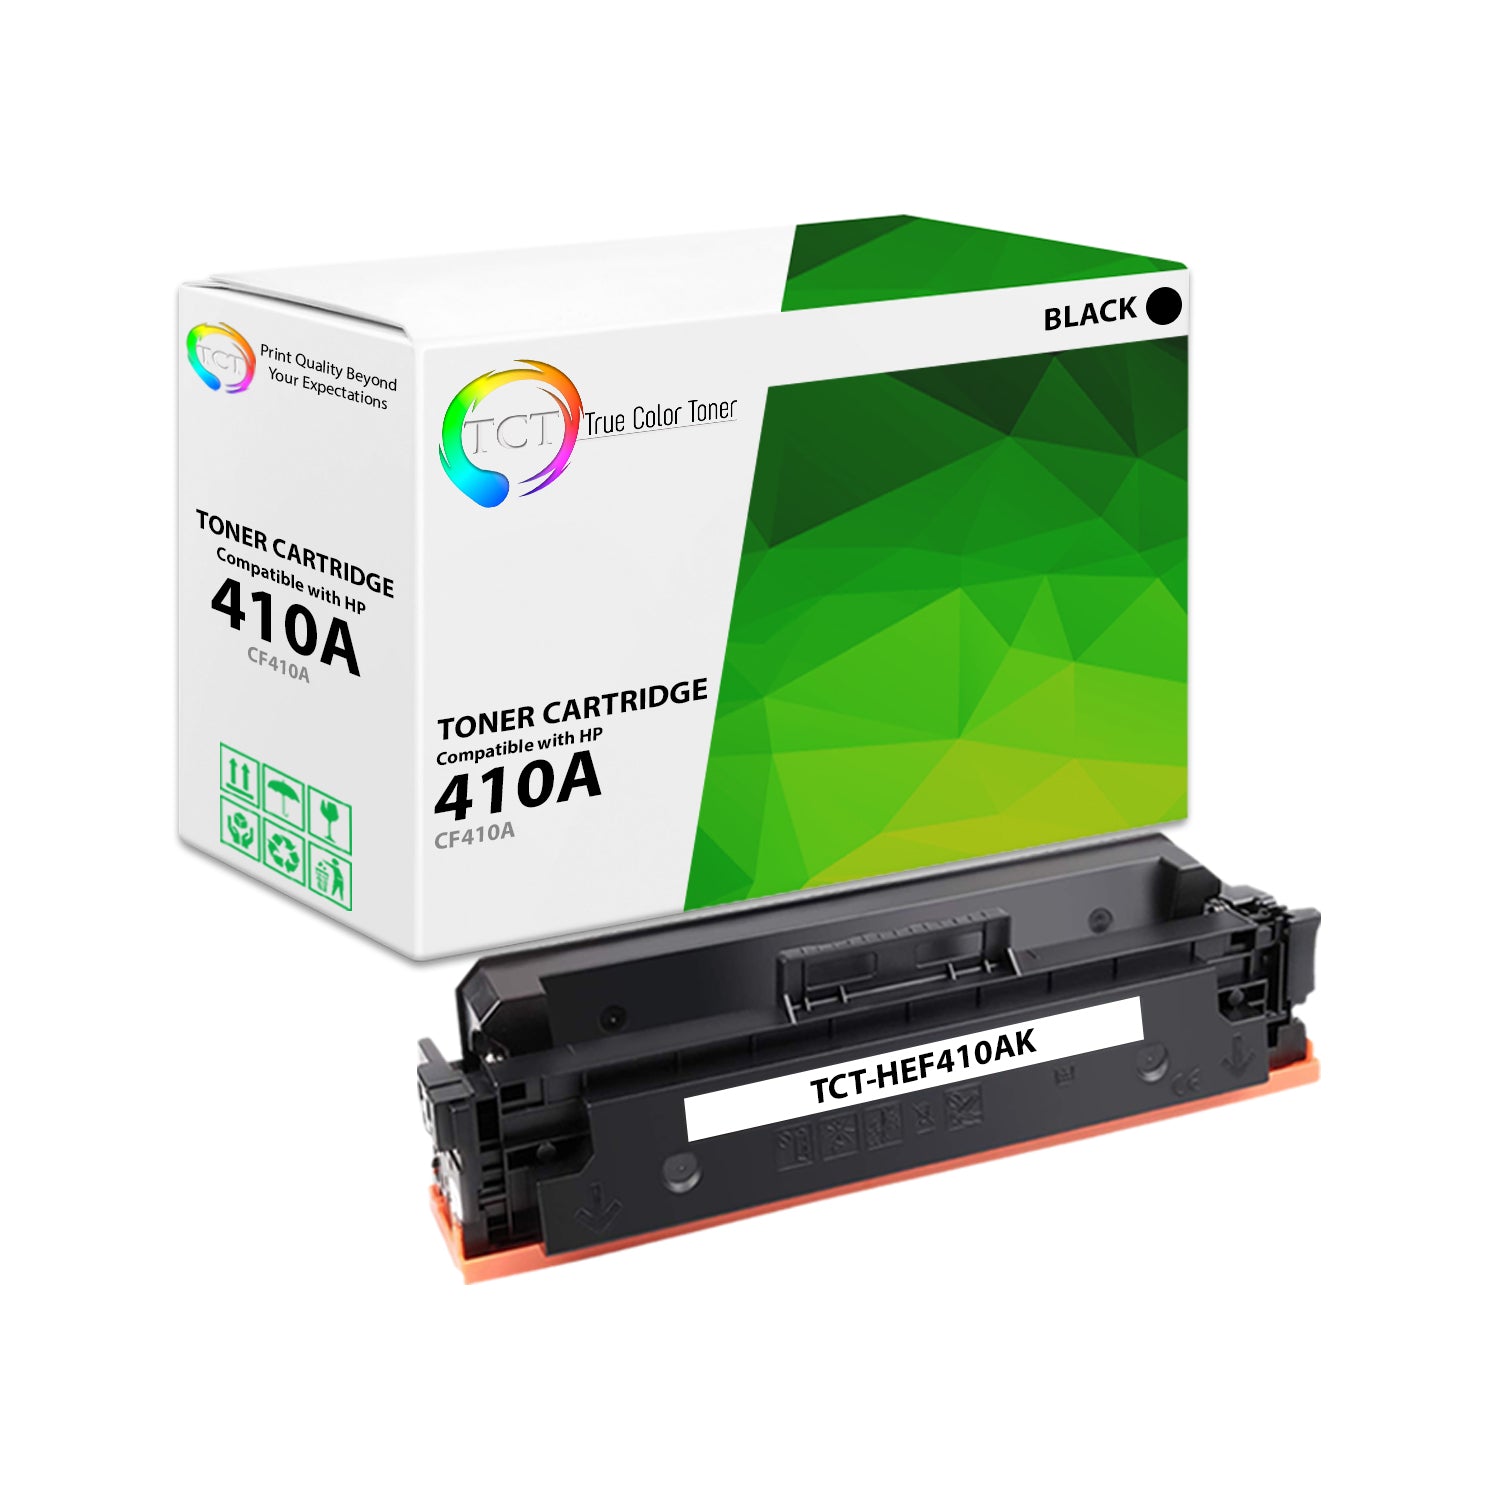 TCT Compatible Toner Cartridge Replacement for the HP 410A Series - 1 Pack Black